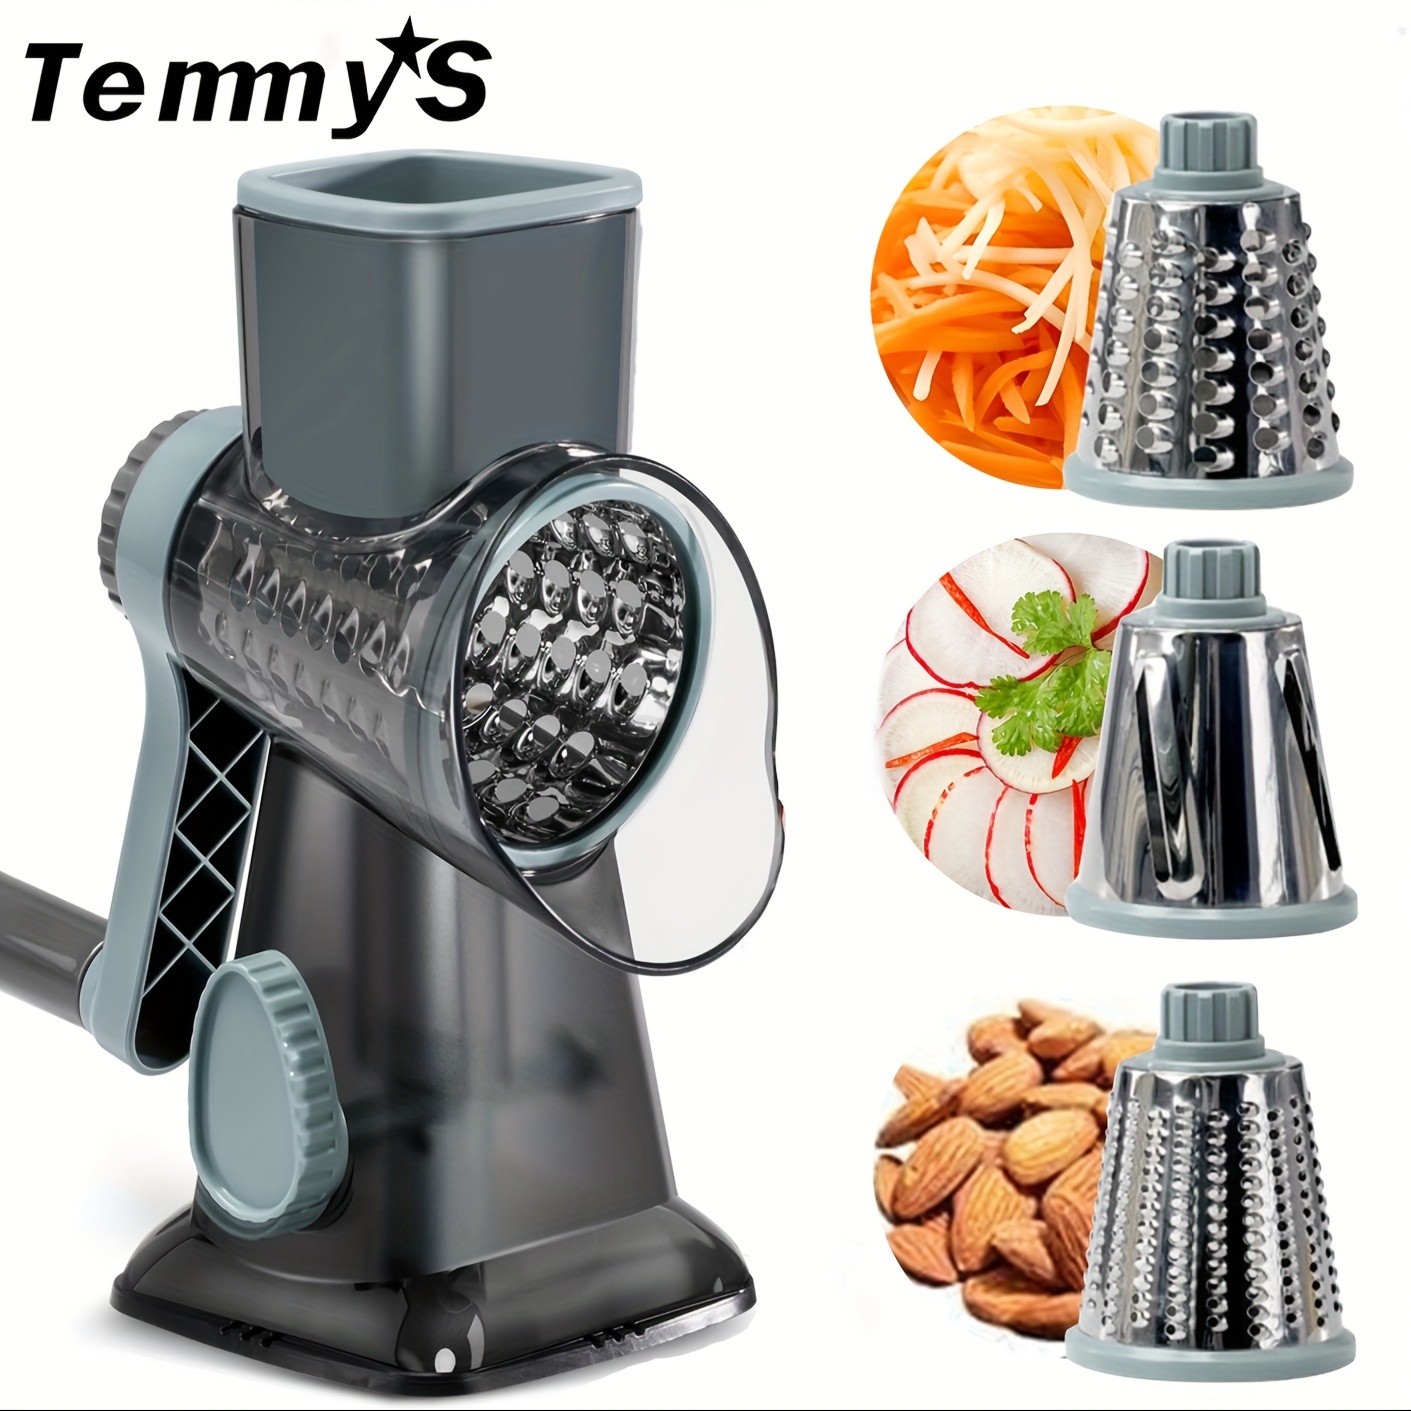 

1 Pcs Rotary Cheese Grater With Handle Vegetable Cheese Slicer Grater For Kitchen 3 Changeable Blades For Cheese Potato Zucchini Nuts Chocolate